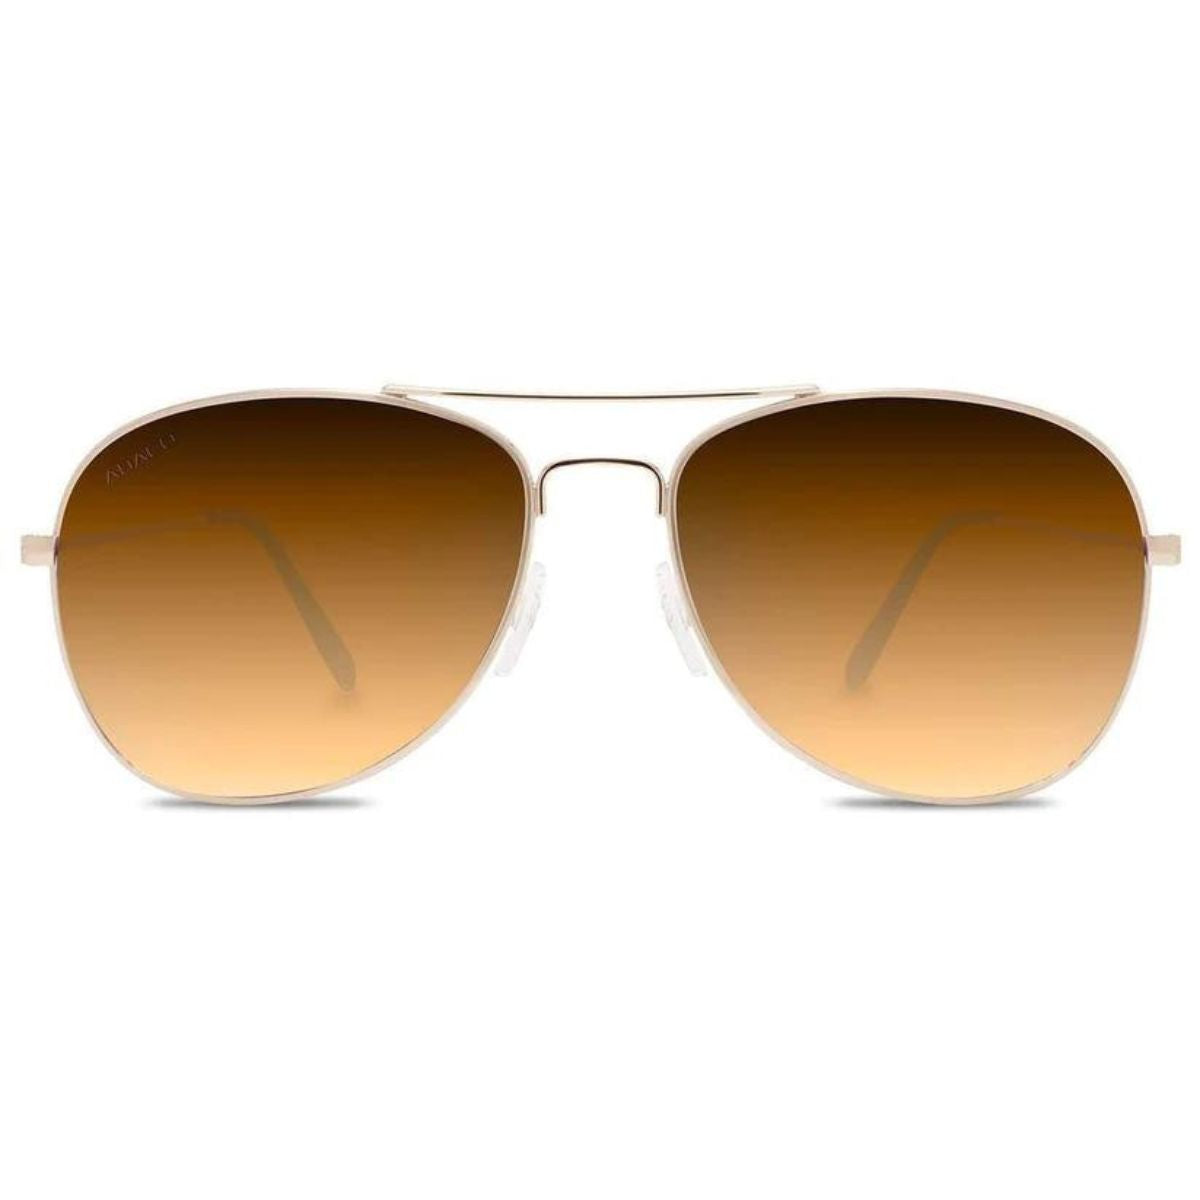 Abaco Avery Sunglasses in Gold/Brown Gradient